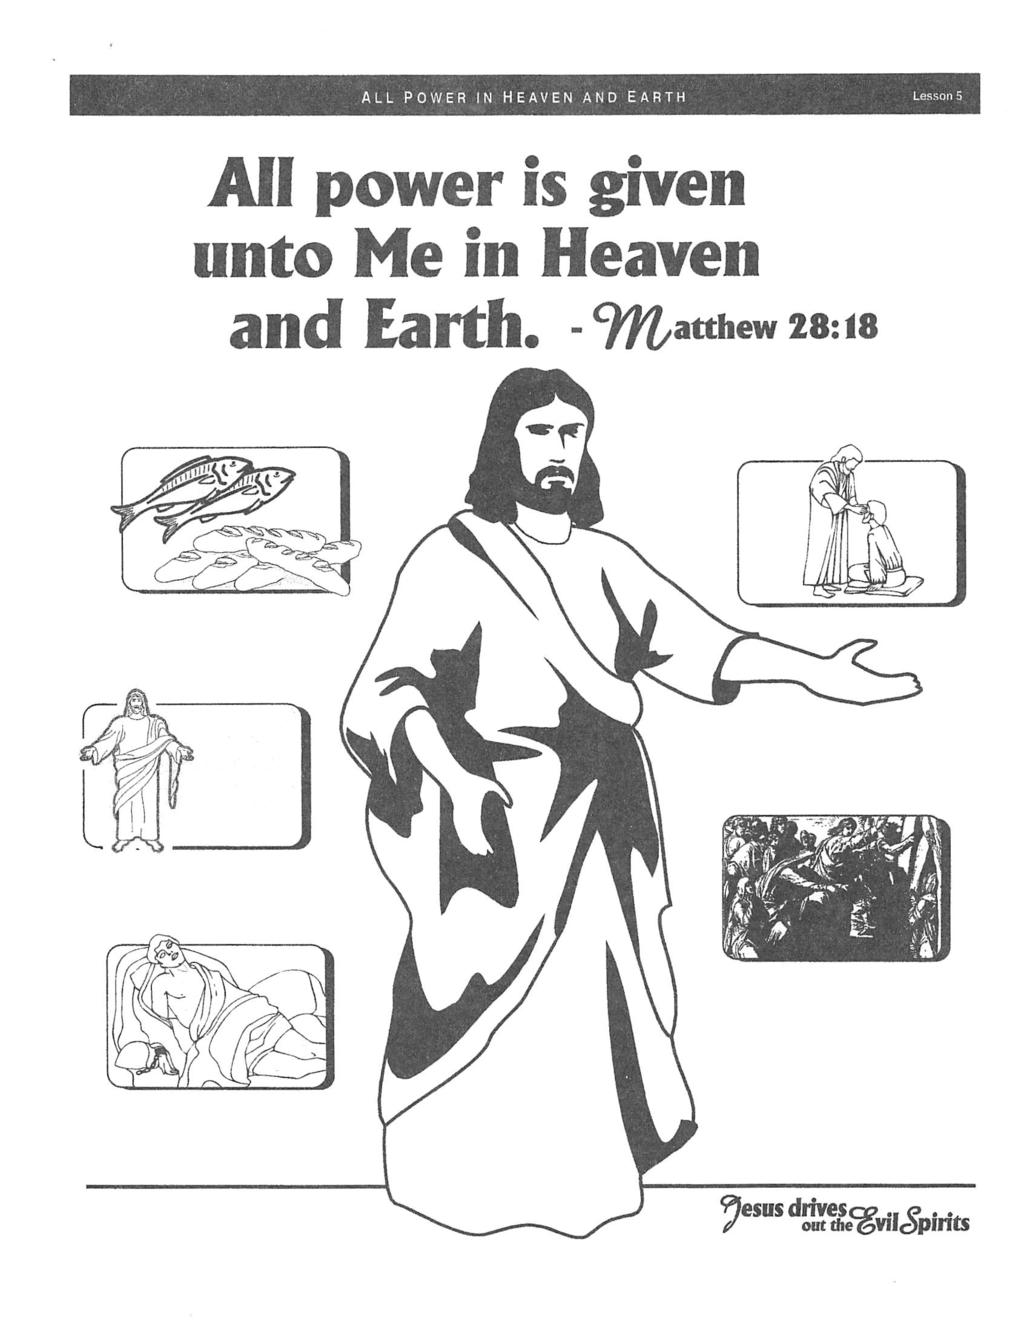 ALL POWER IN HEAVEN AND EARTH Lesson 5 All power Is given unto Me